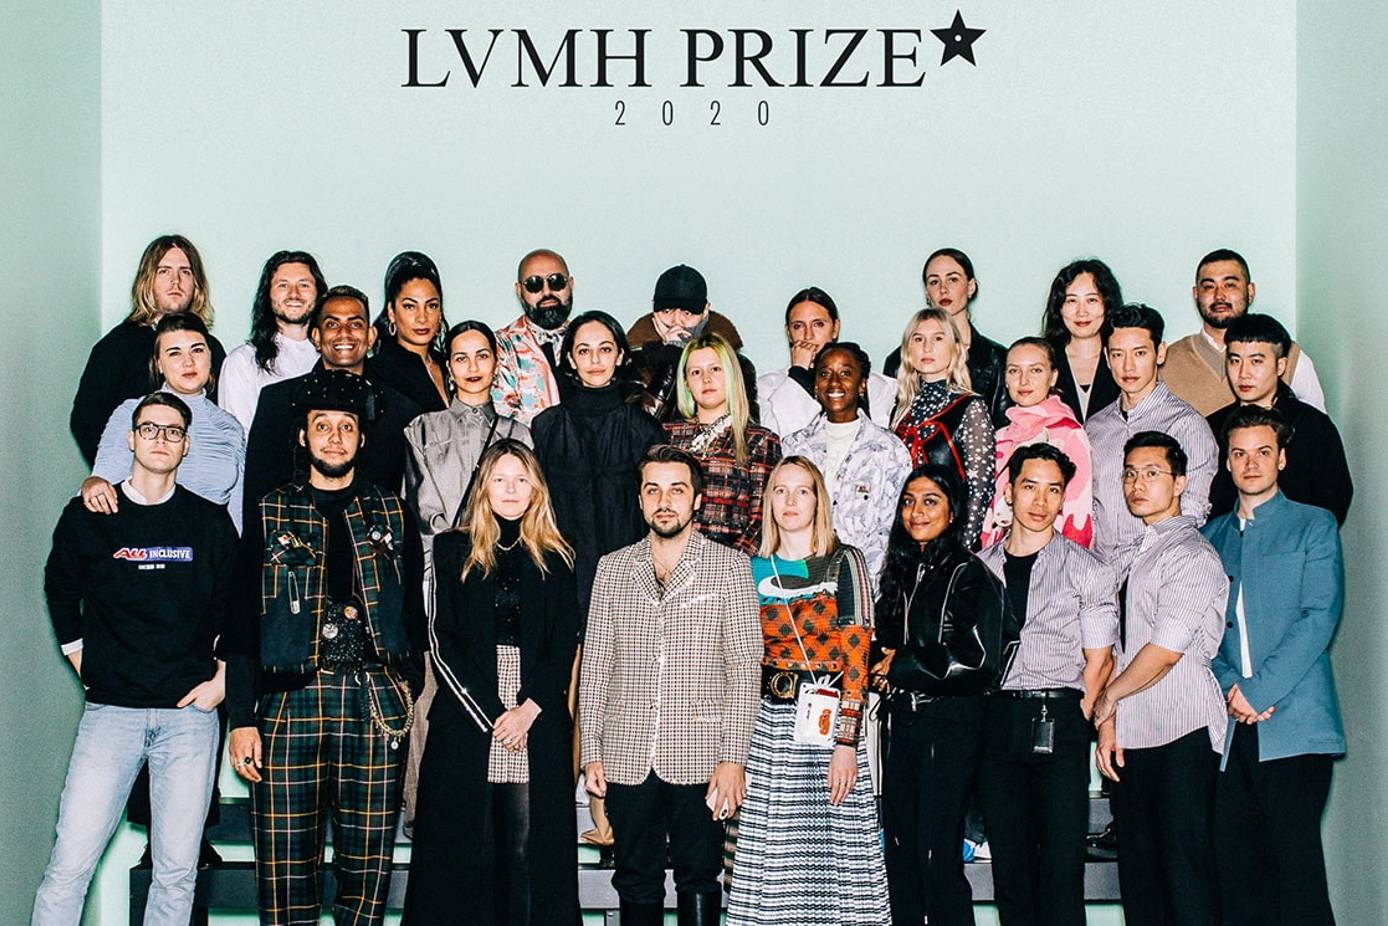 Delphine Arnault on what it takes to win the LVMH Prize